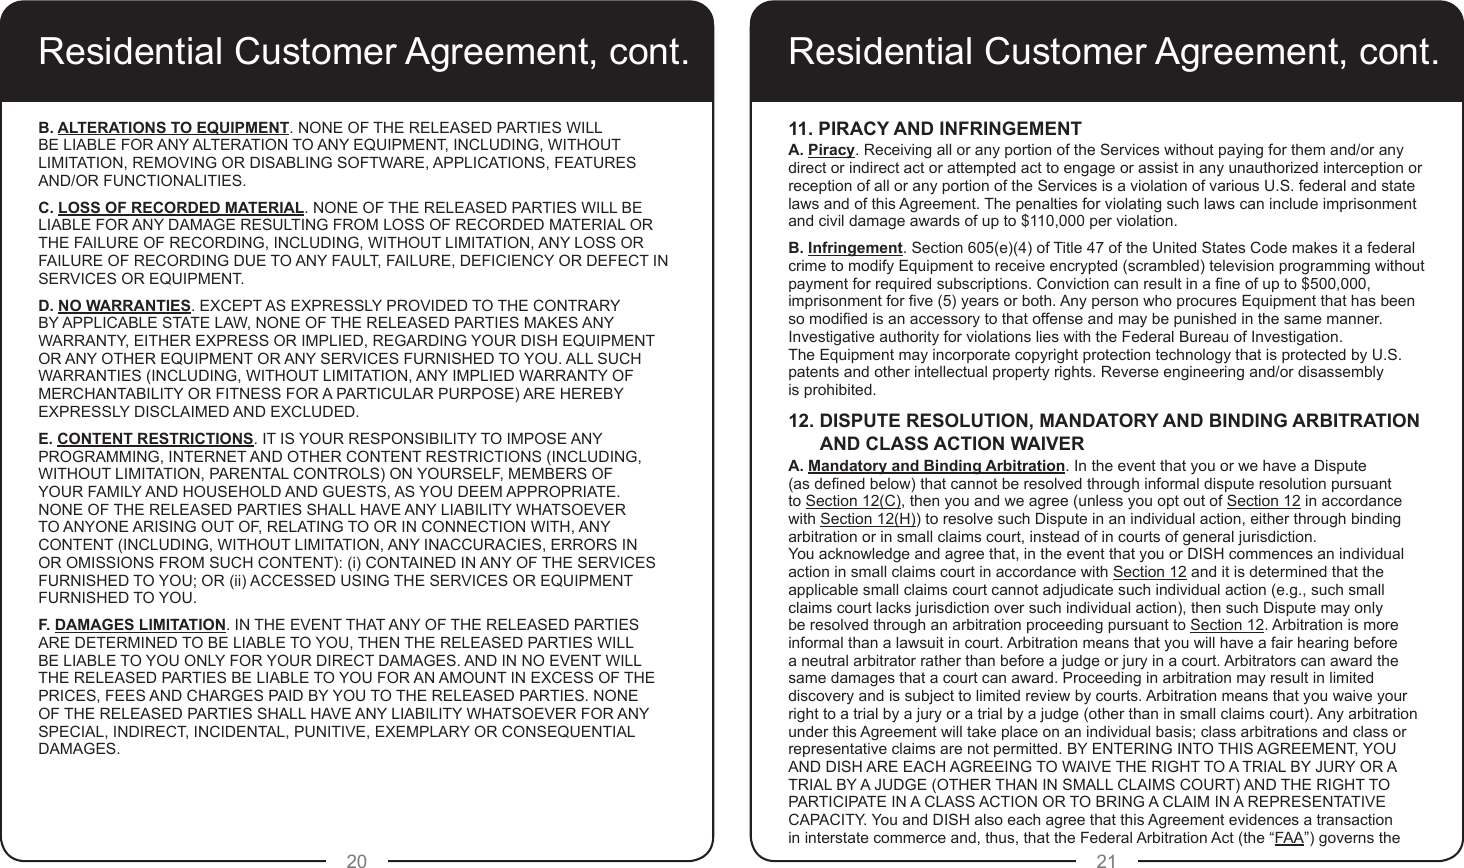 20 21Residential Customer Agreement, cont.B. ALTERATIONS TO EQUIPMENT. NONE OF THE RELEASED PARTIES WILL BE LIABLE FOR ANY ALTERATION TO ANY EQUIPMENT, INCLUDING, WITHOUT LIMITATION, REMOVING OR DISABLING SOFTWARE, APPLICATIONS, FEATURES AND/OR FUNCTIONALITIES.C. LOSS OF RECORDED MATERIAL. NONE OF THE RELEASED PARTIES WILL BE LIABLE FOR ANY DAMAGE RESULTING FROM LOSS OF RECORDED MATERIAL OR THE FAILURE OF RECORDING, INCLUDING, WITHOUT LIMITATION, ANY LOSS OR FAILURE OF RECORDING DUE TO ANY FAULT, FAILURE, DEFICIENCY OR DEFECT IN SERVICES OR EQUIPMENT.D. NO WARRANTIES. EXCEPT AS EXPRESSLY PROVIDED TO THE CONTRARY BY APPLICABLE STATE LAW, NONE OF THE RELEASED PARTIES MAKES ANY WARRANTY, EITHER EXPRESS OR IMPLIED, REGARDING YOUR DISH EQUIPMENT OR ANY OTHER EQUIPMENT OR ANY SERVICES FURNISHED TO YOU. ALL SUCH WARRANTIES (INCLUDING, WITHOUT LIMITATION, ANY IMPLIED WARRANTY OF MERCHANTABILITY OR FITNESS FOR A PARTICULAR PURPOSE) ARE HEREBY EXPRESSLY DISCLAIMED AND EXCLUDED.E. CONTENT RESTRICTIONS. IT IS YOUR RESPONSIBILITY TO IMPOSE ANY PROGRAMMING, INTERNET AND OTHER CONTENT RESTRICTIONS (INCLUDING, WITHOUT LIMITATION, PARENTAL CONTROLS) ON YOURSELF, MEMBERS OF YOUR FAMILY AND HOUSEHOLD AND GUESTS, AS YOU DEEM APPROPRIATE. NONE OF THE RELEASED PARTIES SHALL HAVE ANY LIABILITY WHATSOEVER TO ANYONE ARISING OUT OF, RELATING TO OR IN CONNECTION WITH, ANY CONTENT (INCLUDING, WITHOUT LIMITATION, ANY INACCURACIES, ERRORS IN OR OMISSIONS FROM SUCH CONTENT): (i) CONTAINED IN ANY OF THE SERVICES FURNISHED TO YOU; OR (ii) ACCESSED USING THE SERVICES OR EQUIPMENT FURNISHED TO YOU.F. DAMAGES LIMITATION. IN THE EVENT THAT ANY OF THE RELEASED PARTIES ARE DETERMINED TO BE LIABLE TO YOU, THEN THE RELEASED PARTIES WILL BE LIABLE TO YOU ONLY FOR YOUR DIRECT DAMAGES. AND IN NO EVENT WILL THE RELEASED PARTIES BE LIABLE TO YOU FOR AN AMOUNT IN EXCESS OF THE PRICES, FEES AND CHARGES PAID BY YOU TO THE RELEASED PARTIES. NONE OF THE RELEASED PARTIES SHALL HAVE ANY LIABILITY WHATSOEVER FOR ANY SPECIAL, INDIRECT, INCIDENTAL, PUNITIVE, EXEMPLARY OR CONSEQUENTIAL DAMAGES.Residential Customer Agreement, cont.11. PIRACY AND INFRINGEMENTA. Piracy. Receiving all or any portion of the Services without paying for them and/or any direct or indirect act or attempted act to engage or assist in any unauthorized interception or reception of all or any portion of the Services is a violation of various U.S. federal and state laws and of this Agreement. The penalties for violating such laws can include imprisonment and civil damage awards of up to $110,000 per violation. B. Infringement. Section 605(e)(4) of Title 47 of the United States Code makes it a federal crime to modify Equipment to receive encrypted (scrambled) television programming without payment for required subscriptions. Conviction can result in a ne of up to $500,000, imprisonment for ve (5) years or both. Any person who procures Equipment that has been so modied is an accessory to that offense and may be punished in the same manner. Investigative authority for violations lies with the Federal Bureau of Investigation.  The Equipment may incorporate copyright protection technology that is protected by U.S. patents and other intellectual property rights. Reverse engineering and/or disassembly  is prohibited.12. DISPUTE RESOLUTION, MANDATORY AND BINDING ARBITRATIONAND CLASS ACTION WAIVERA. Mandatory and Binding Arbitration. In the event that you or we have a Dispute  (as dened below) that cannot be resolved through informal dispute resolution pursuant to Section 12(C), then you and we agree (unless you opt out of Section 12 in accordance with Section 12(H)) to resolve such Dispute in an individual action, either through binding arbitration or in small claims court, instead of in courts of general jurisdiction.  You acknowledge and agree that, in the event that you or DISH commences an individual action in small claims court in accordance with Section 12 and it is determined that the applicable small claims court cannot adjudicate such individual action (e.g., such small claims court lacks jurisdiction over such individual action), then such Dispute may only be resolved through an arbitration proceeding pursuant to Section 12. Arbitration is more informal than a lawsuit in court. Arbitration means that you will have a fair hearing before a neutral arbitrator rather than before a judge or jury in a court. Arbitrators can award the same damages that a court can award. Proceeding in arbitration may result in limited discovery and is subject to limited review by courts. Arbitration means that you waive your right to a trial by a jury or a trial by a judge (other than in small claims court). Any arbitration under this Agreement will take place on an individual basis; class arbitrations and class or representative claims are not permitted. BY ENTERING INTO THIS AGREEMENT, YOU AND DISH ARE EACH AGREEING TO WAIVE THE RIGHT TO A TRIAL BY JURY OR A TRIAL BY A JUDGE (OTHER THAN IN SMALL CLAIMS COURT) AND THE RIGHT TO PARTICIPATE IN A CLASS ACTION OR TO BRING A CLAIM IN A REPRESENTATIVE CAPACITY. You and DISH also each agree that this Agreement evidences a transaction in interstate commerce and, thus, that the Federal Arbitration Act (the “FAA”) governs the 